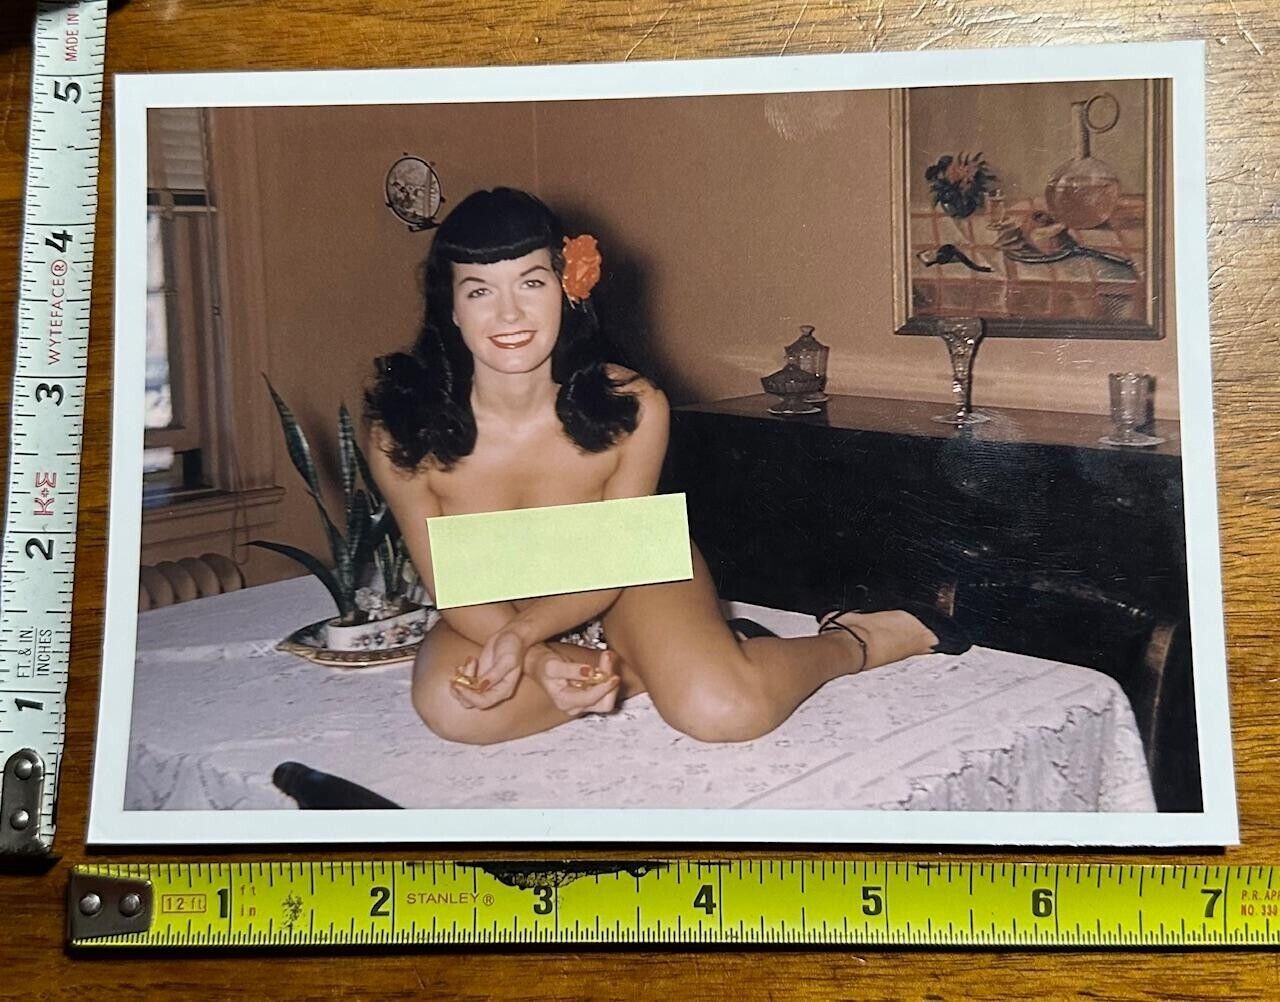 Bettie Page Photograph by Charles West Color Photo Type 2 #A